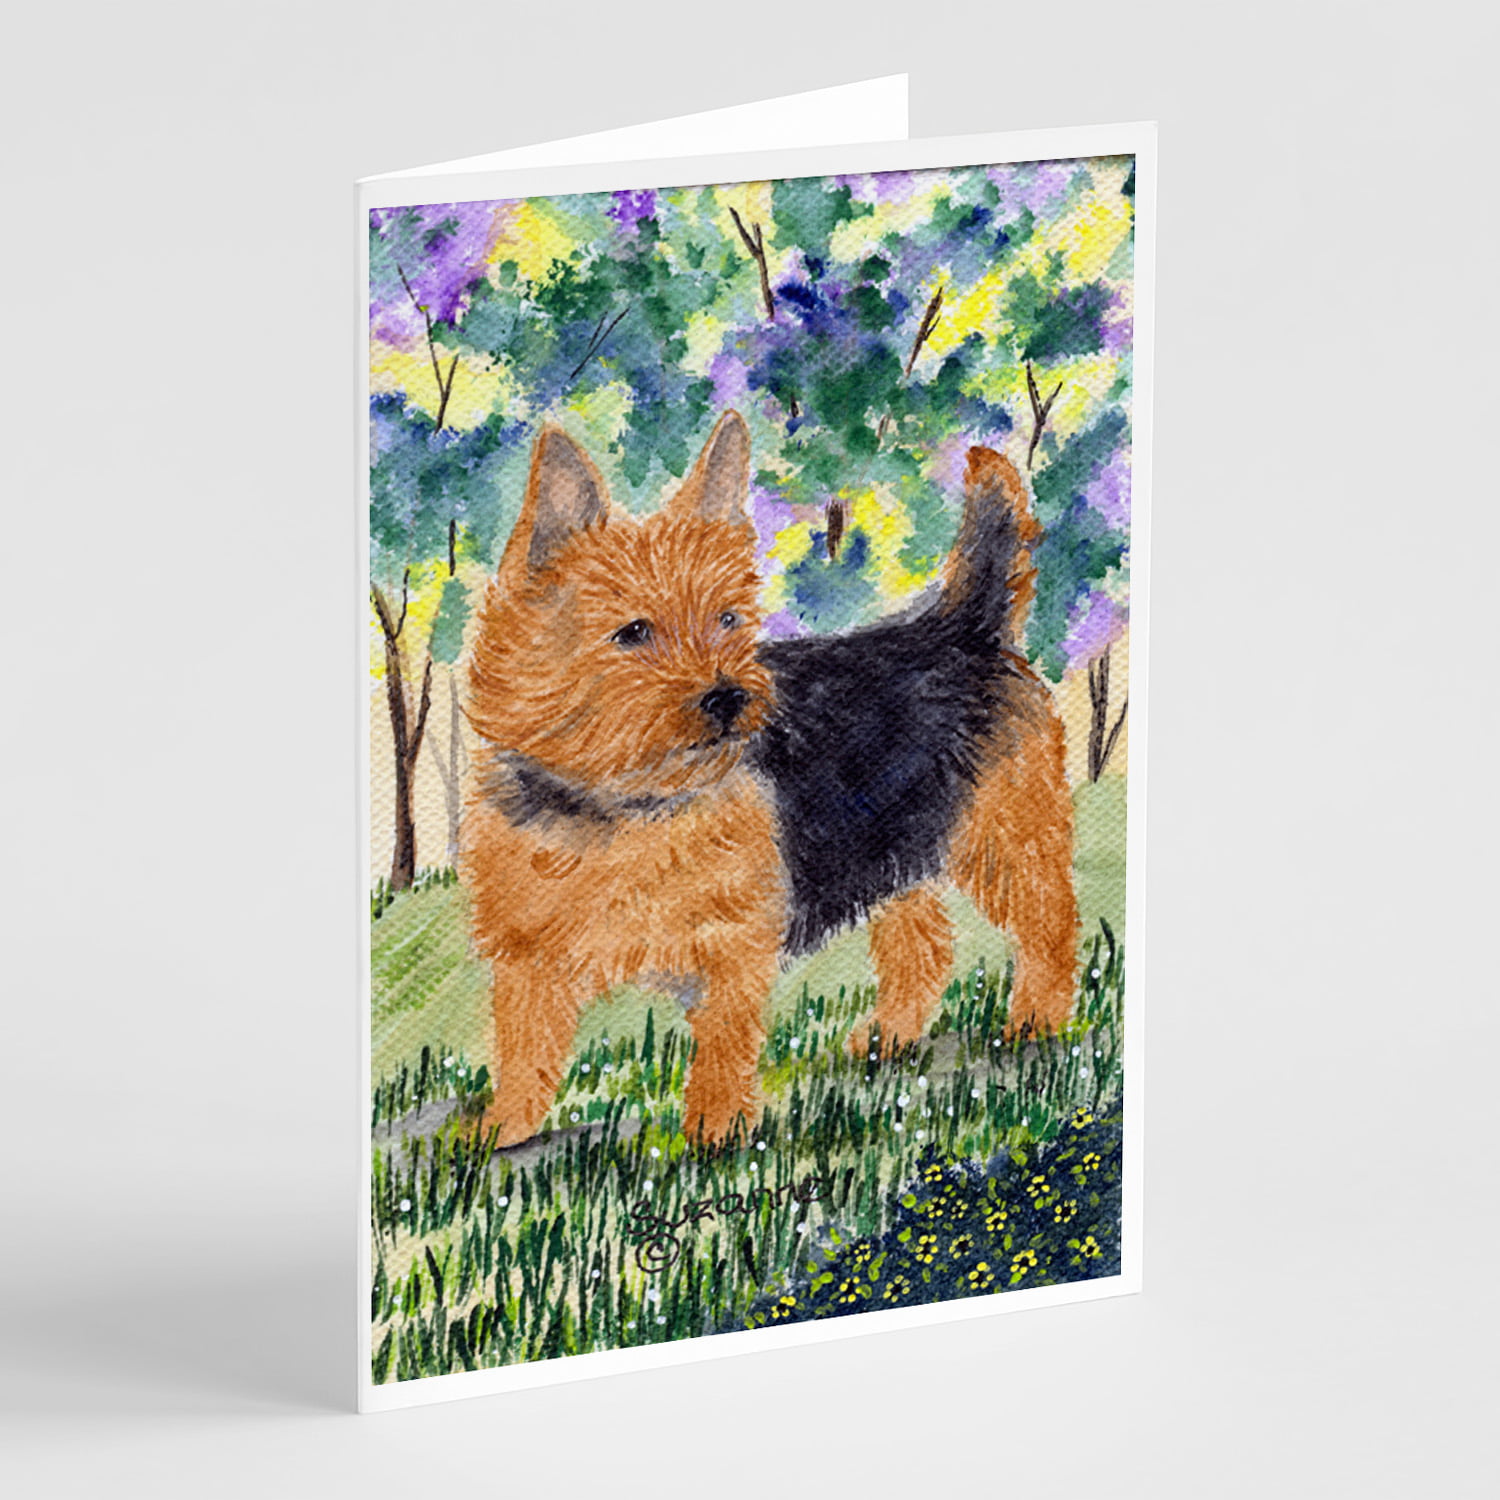 6 Norwich Terrier Dog Blank Art Note Greeting Cards 